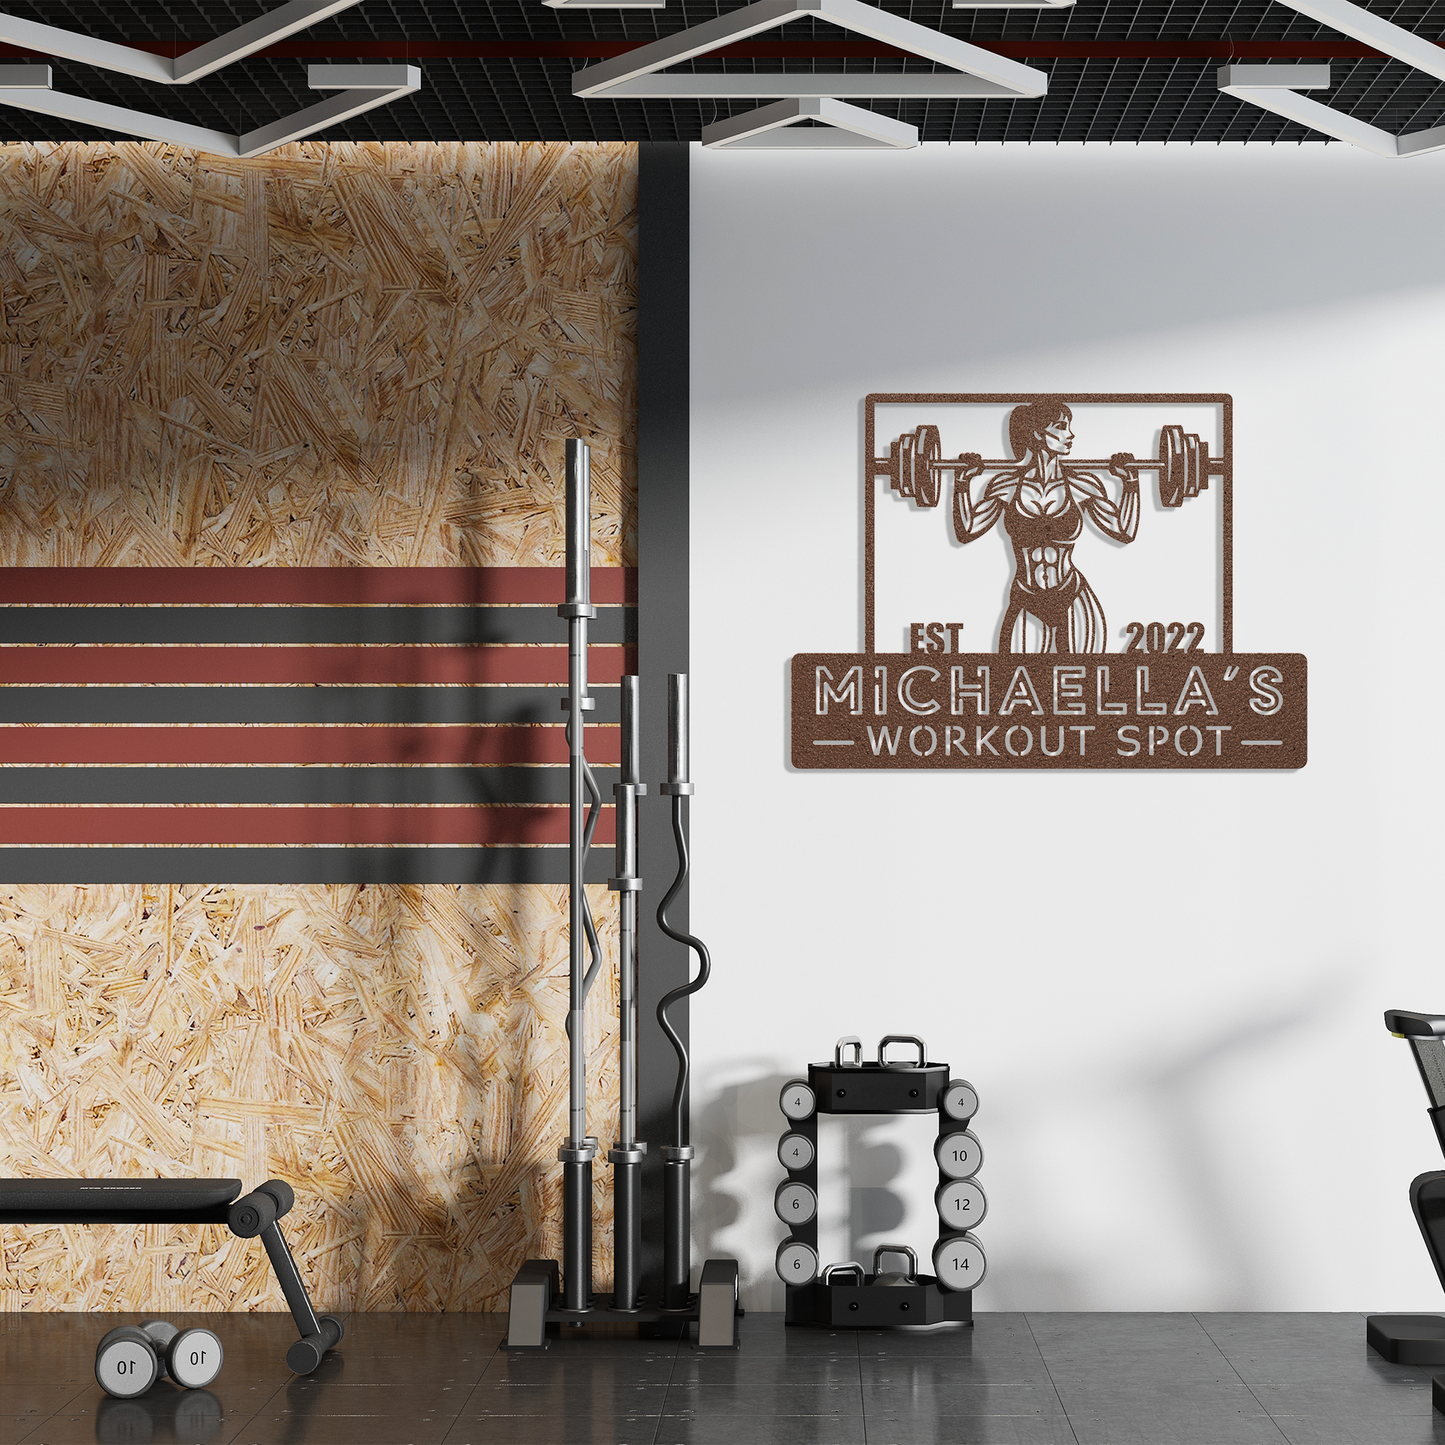 Gym Custom Metal Sign Home Gym Decor Fitness Gift Bodybuilding, Weightlifting